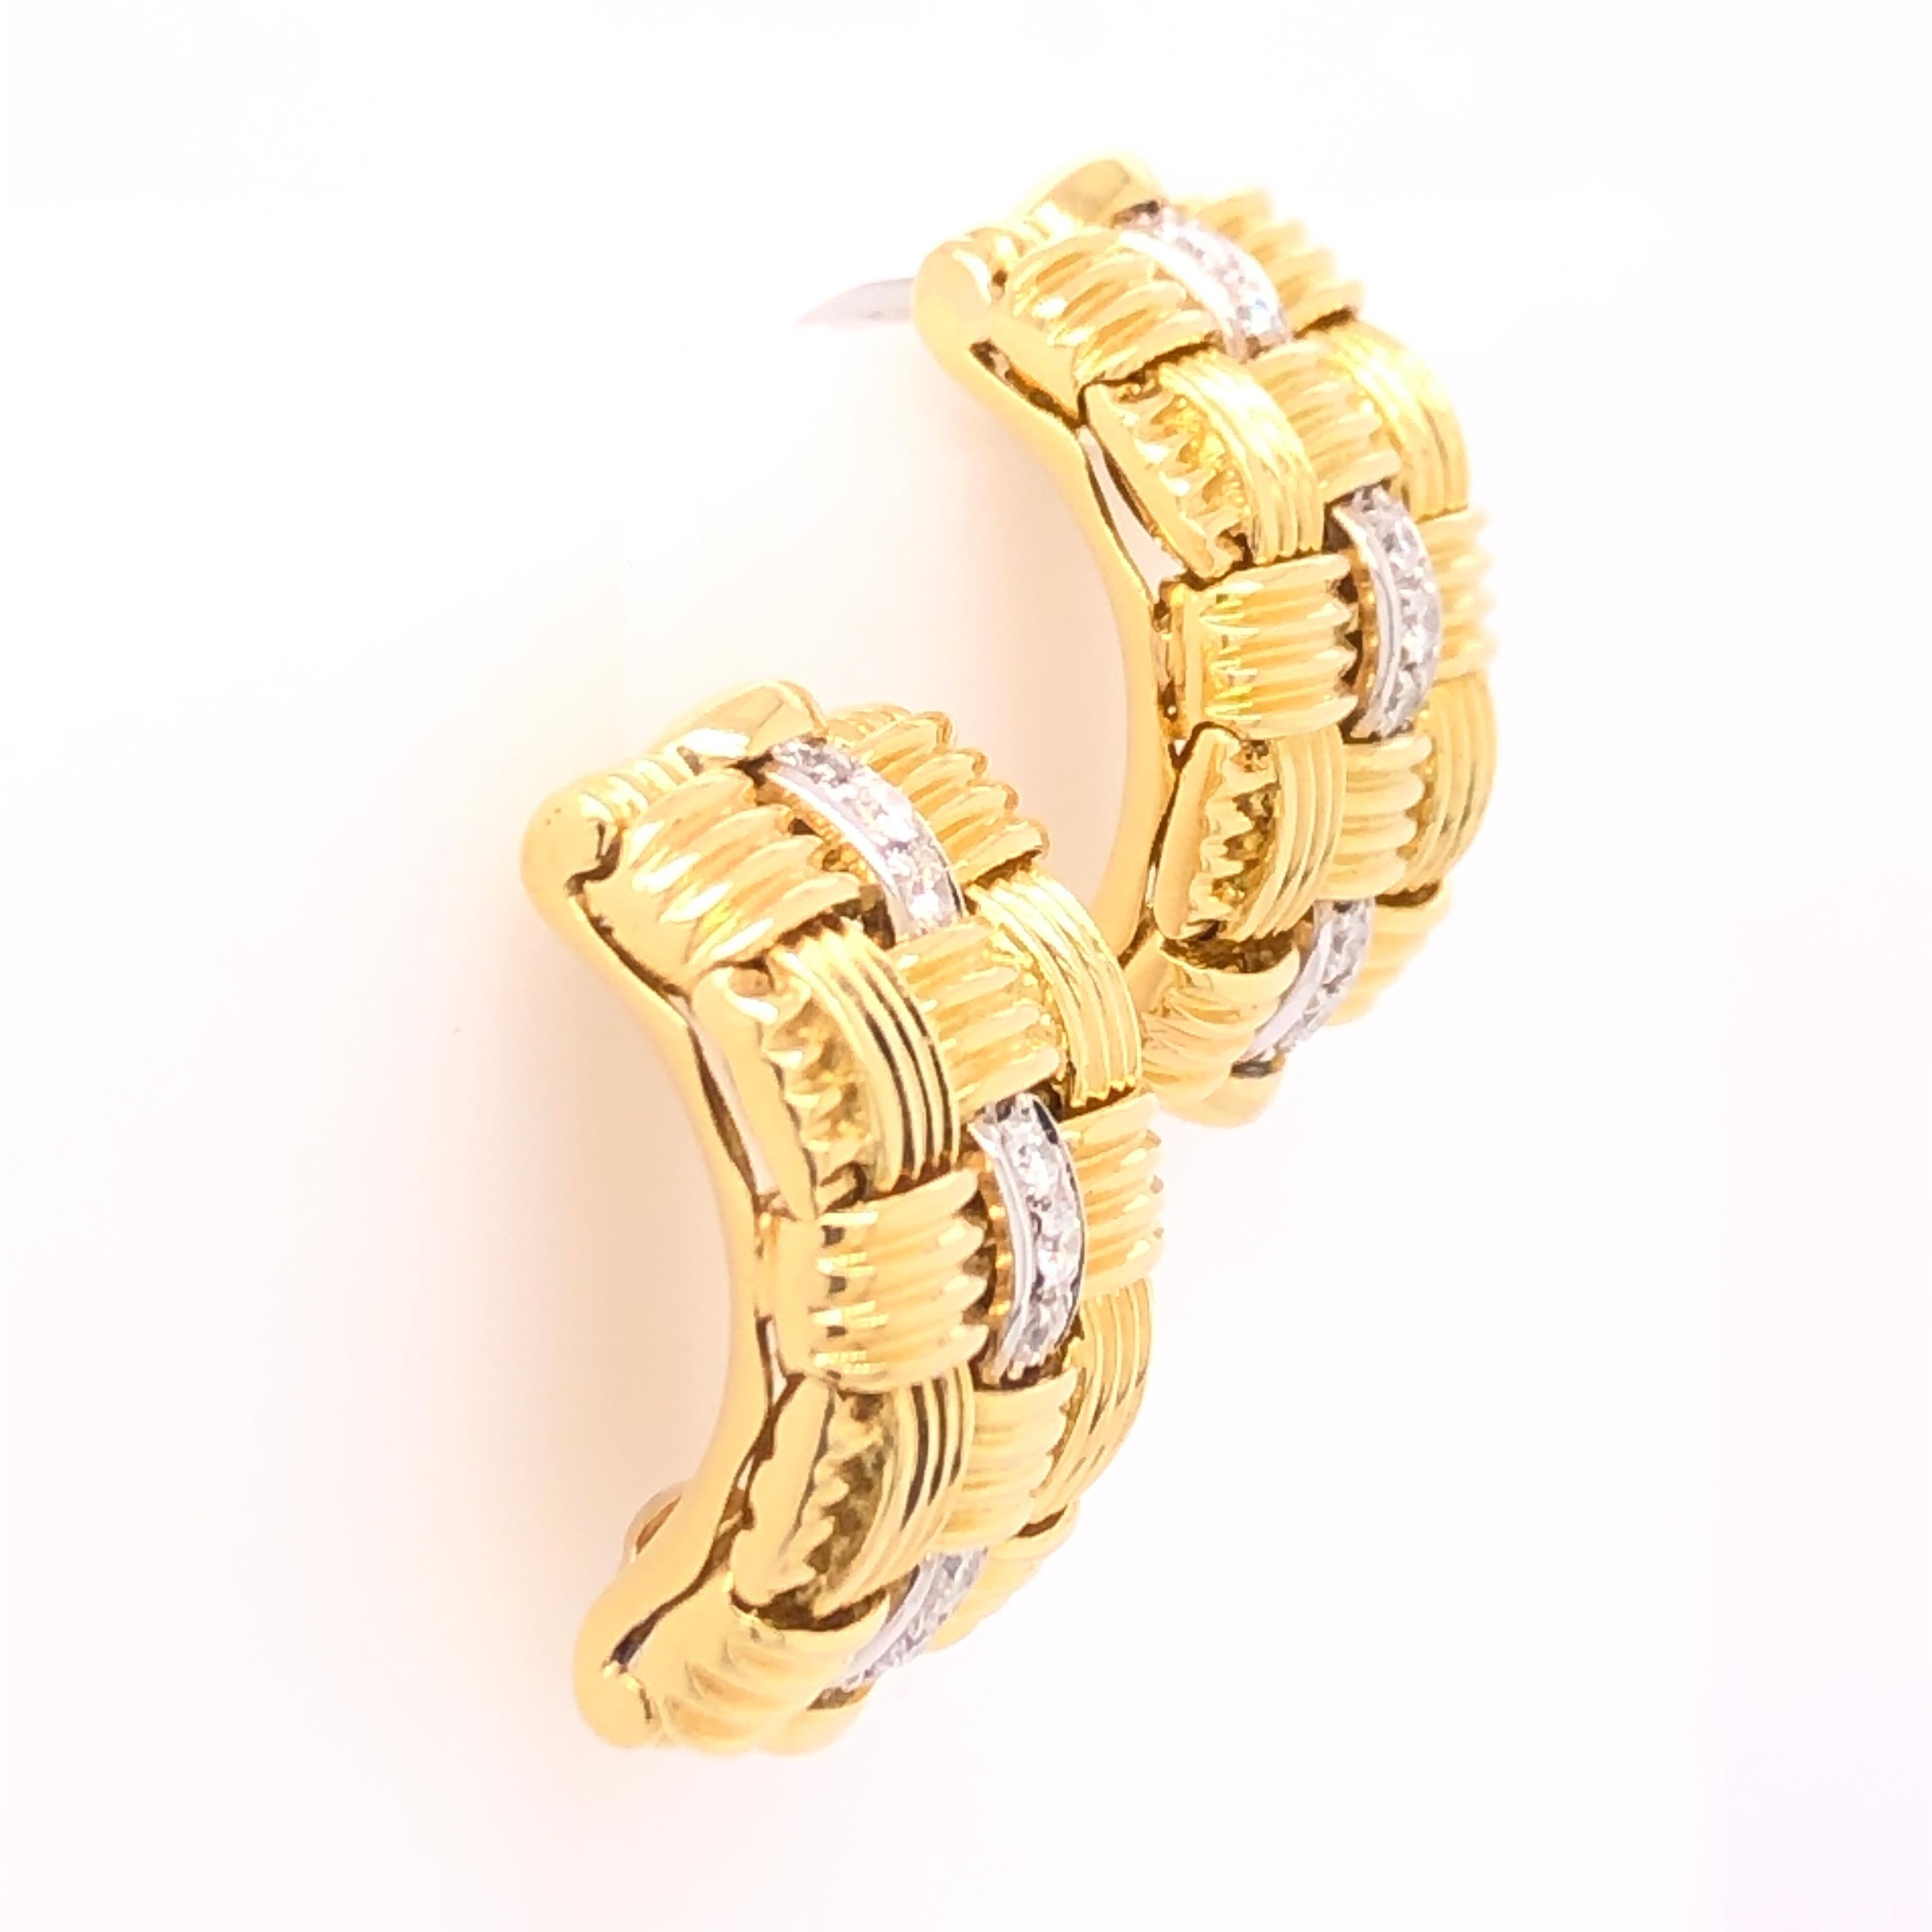 Roberto Coin's classic basket weave earrings in 18K yellow gold showcases a estimated .20 CTW of diamonds. The really cool thing about these earrings is they have an optional post! so you can where them as clip on or with the post for more security.